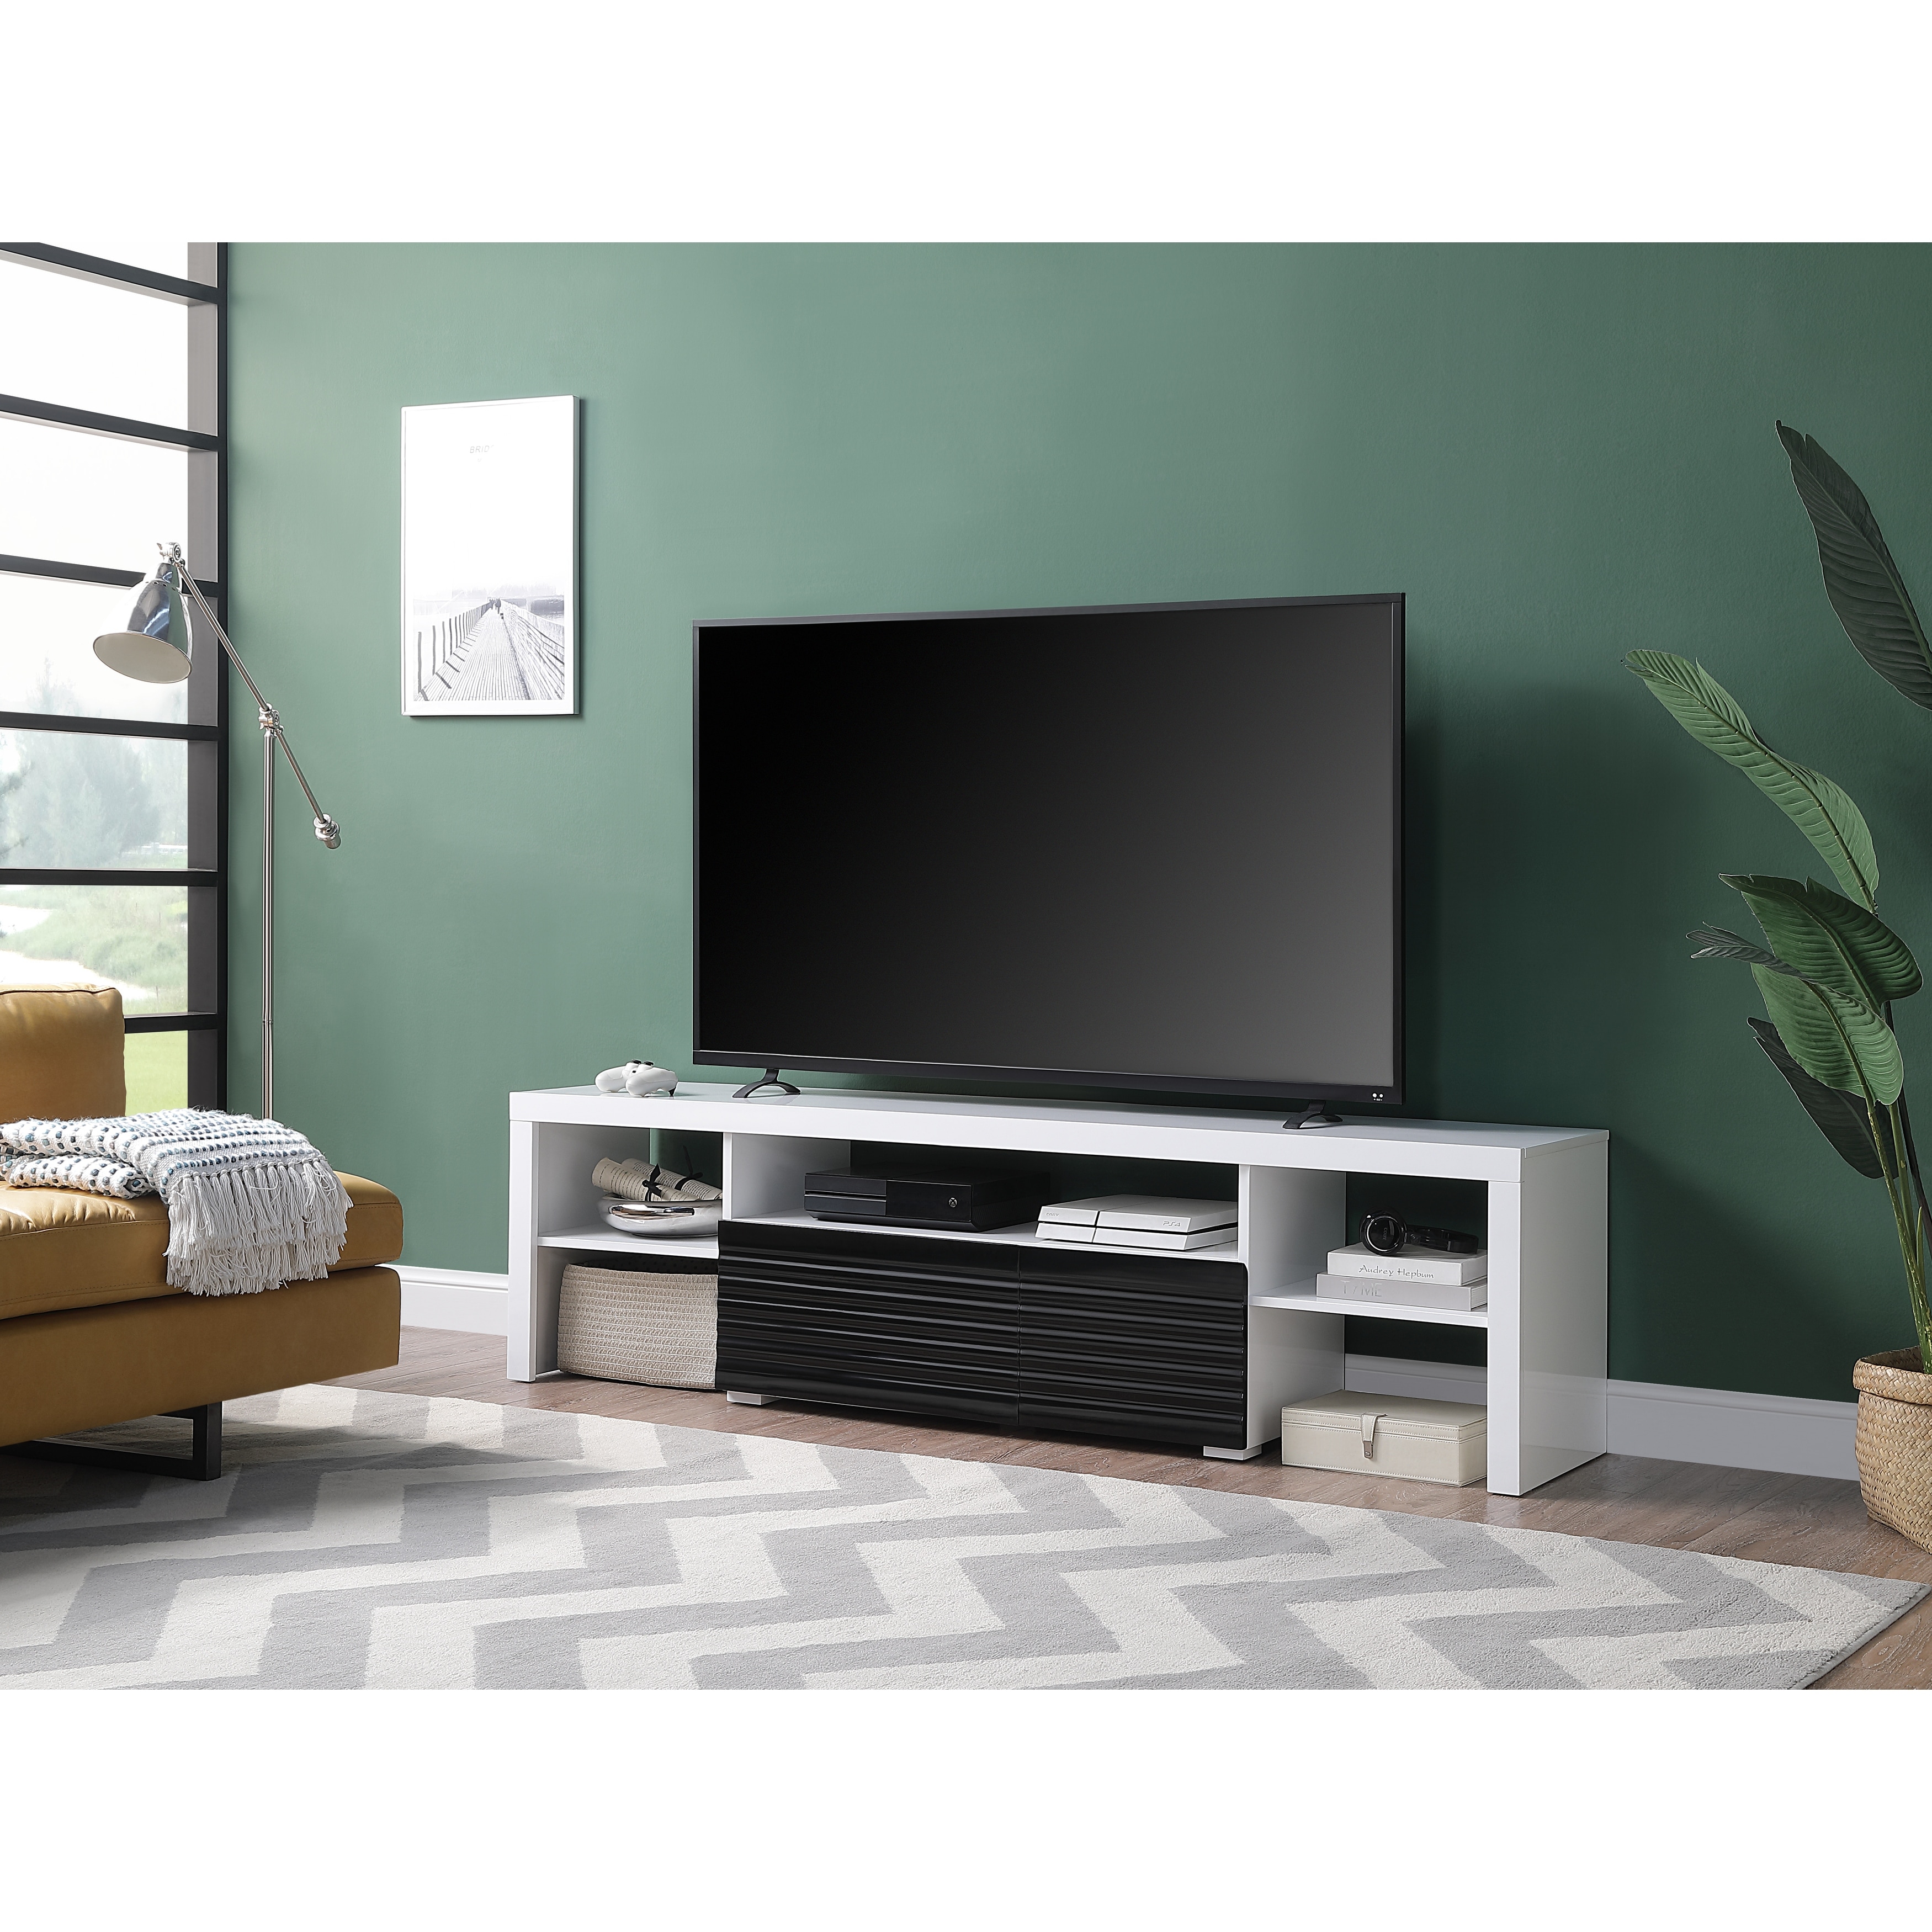 Rasoo Tv Stand In White and Black High Gloss Finishrectangular Tv Standcoffee, Console, Sofa and End Tables